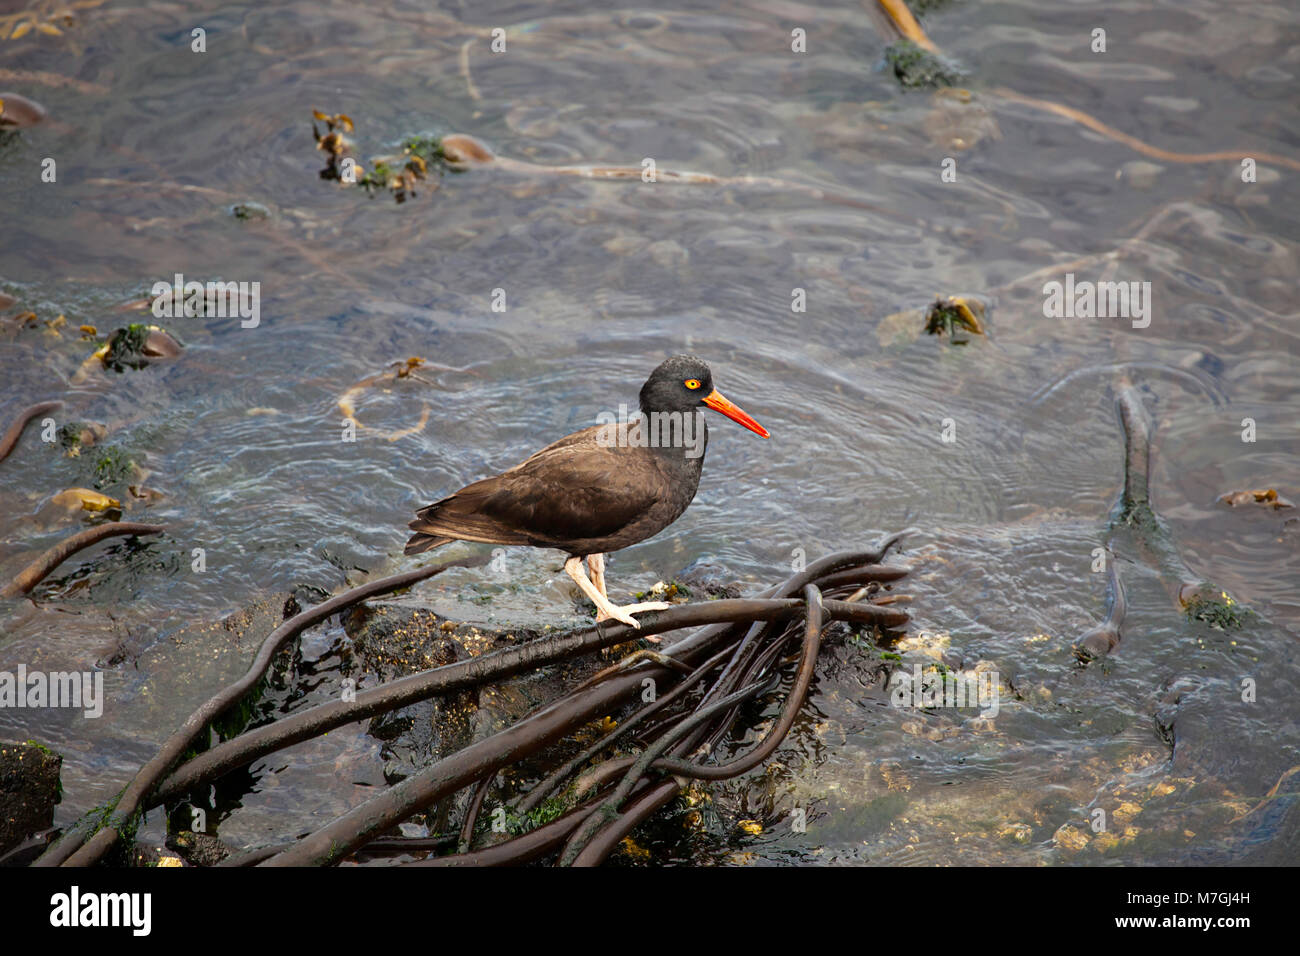 The Black Oystercatcher is a conspicuous Pacific Coast endemic shorebird that resides from Baja California to western Aleutian Islands.  This individu Stock Photo